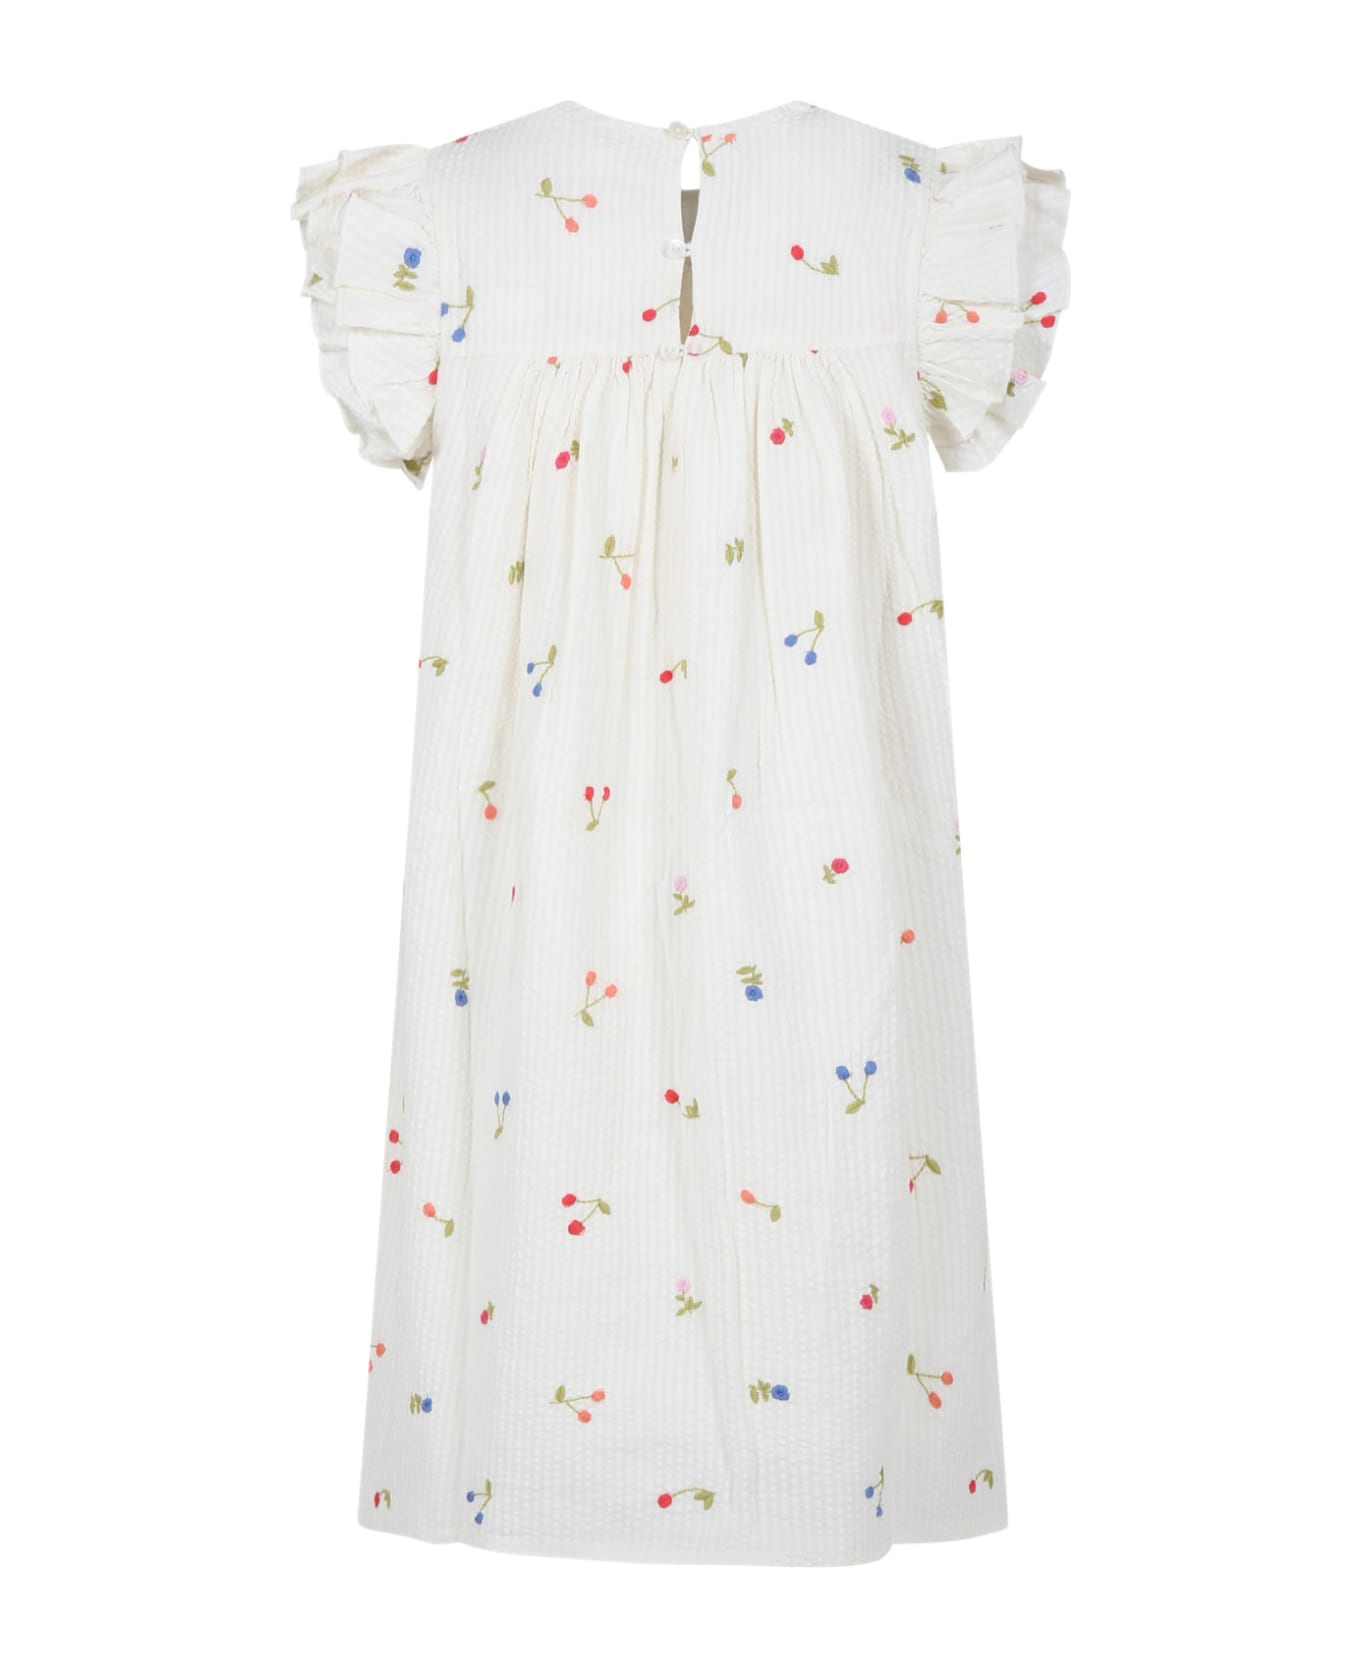 Bonpoint White Dress For Girl With All-over Cherry And Multicolor Flower Embroidery - White